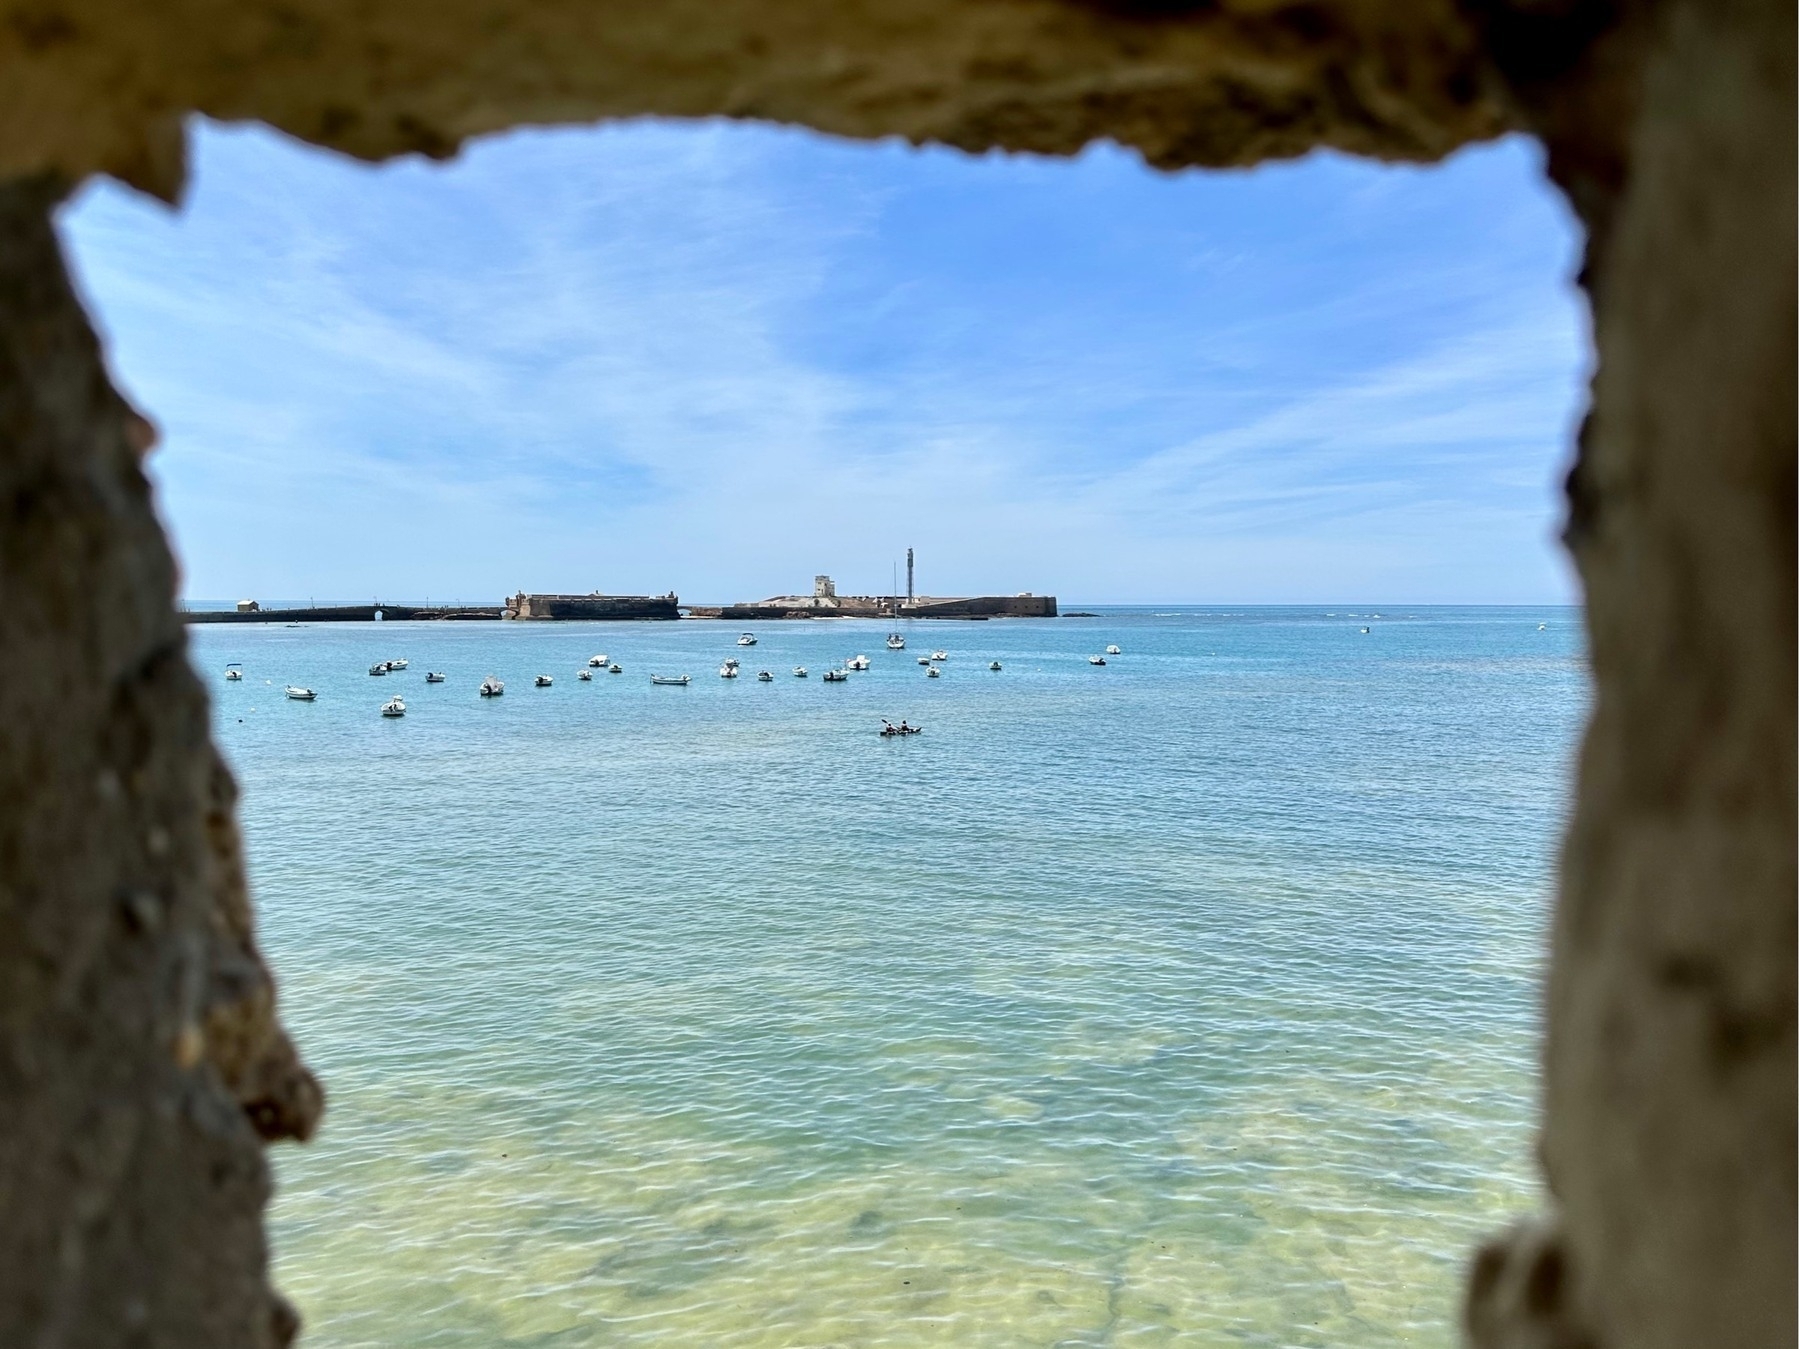 Looking out into the harbour through the frame of a castle embrasure, towards many anchored watercraft, and a small boat being rowed by two people